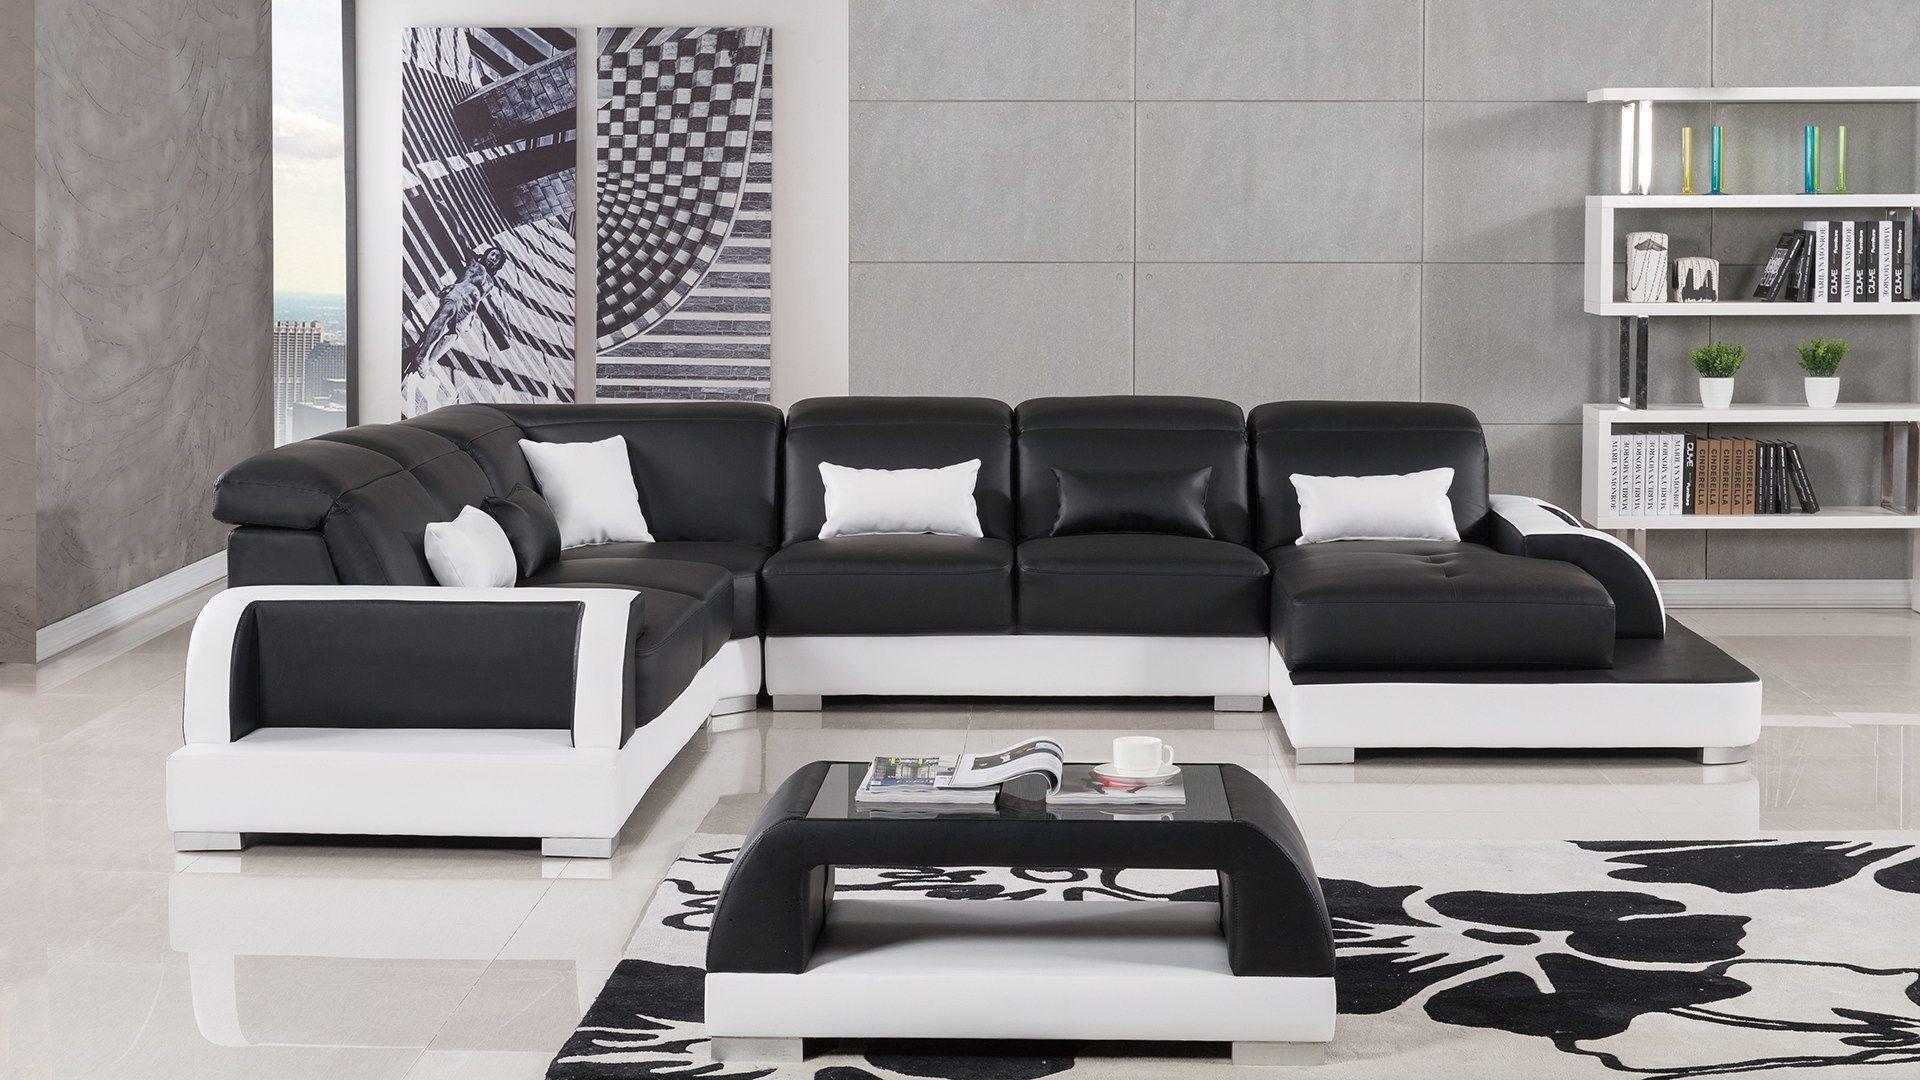 Contemporary, Modern Sectional Sofa Set AE-LD811-BK.W AE-LD811R-BK.W in White, Black Bonded Leather